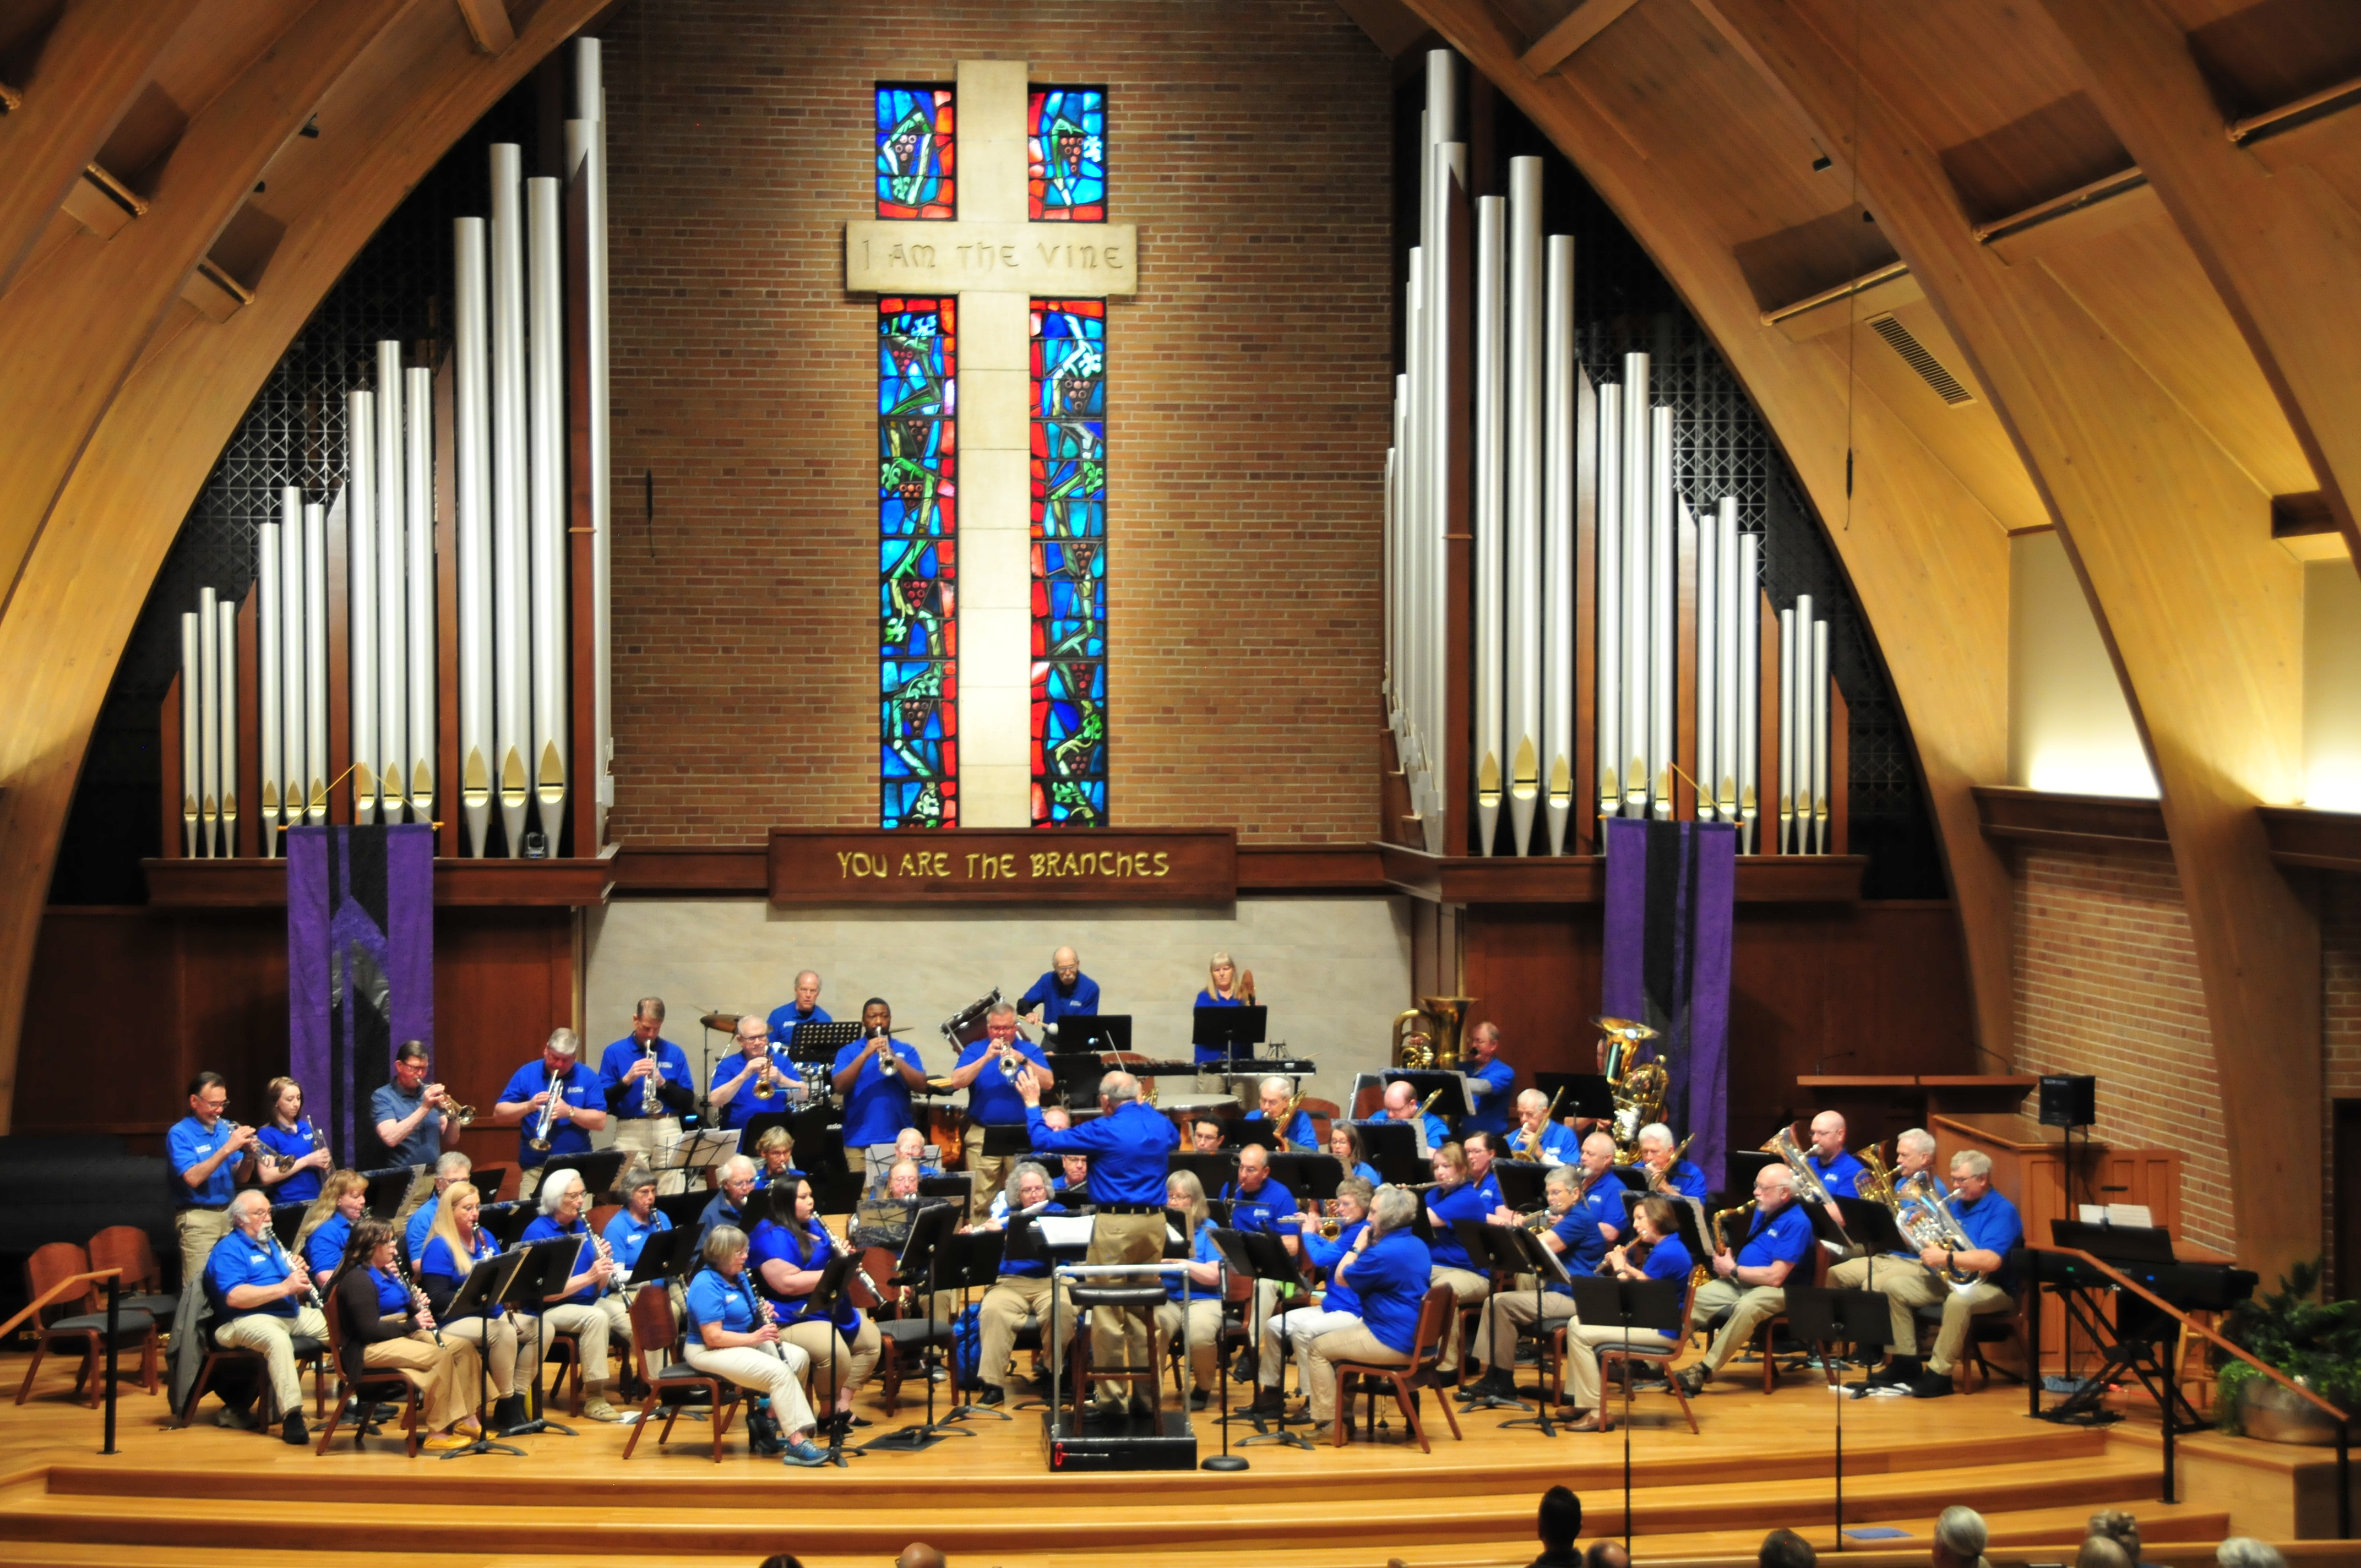 Concert at First Presbyterian March 26, 2023